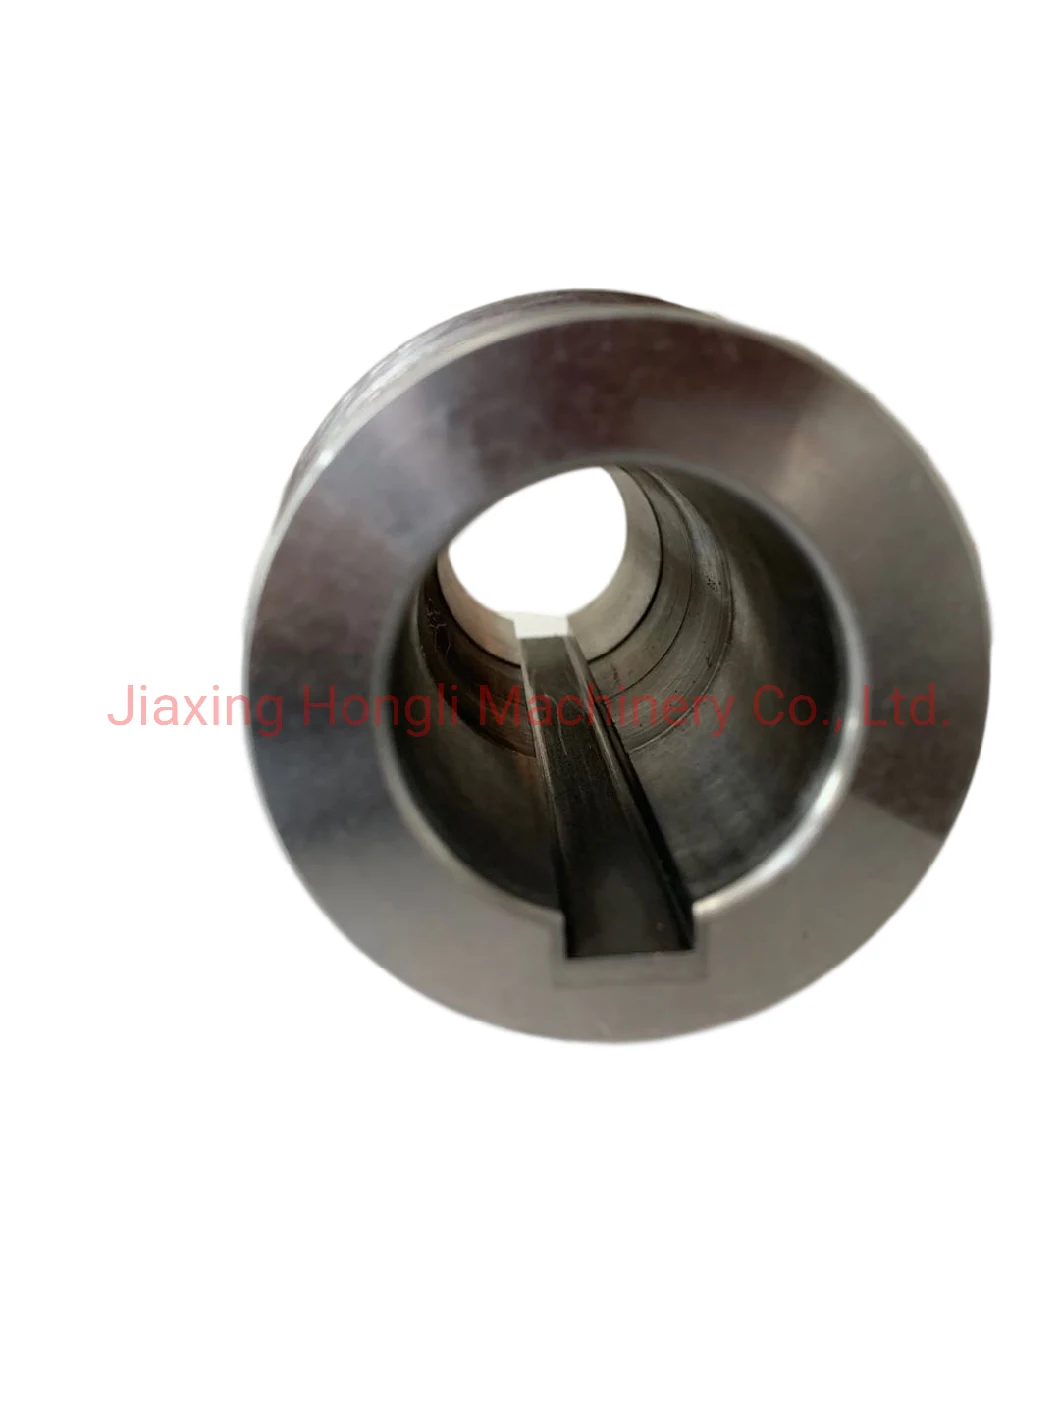 Hollow Shaft/Solid Shaft of Stainless Steel Reducer/Stainless Steel 316ss/Drive Shaft Jie